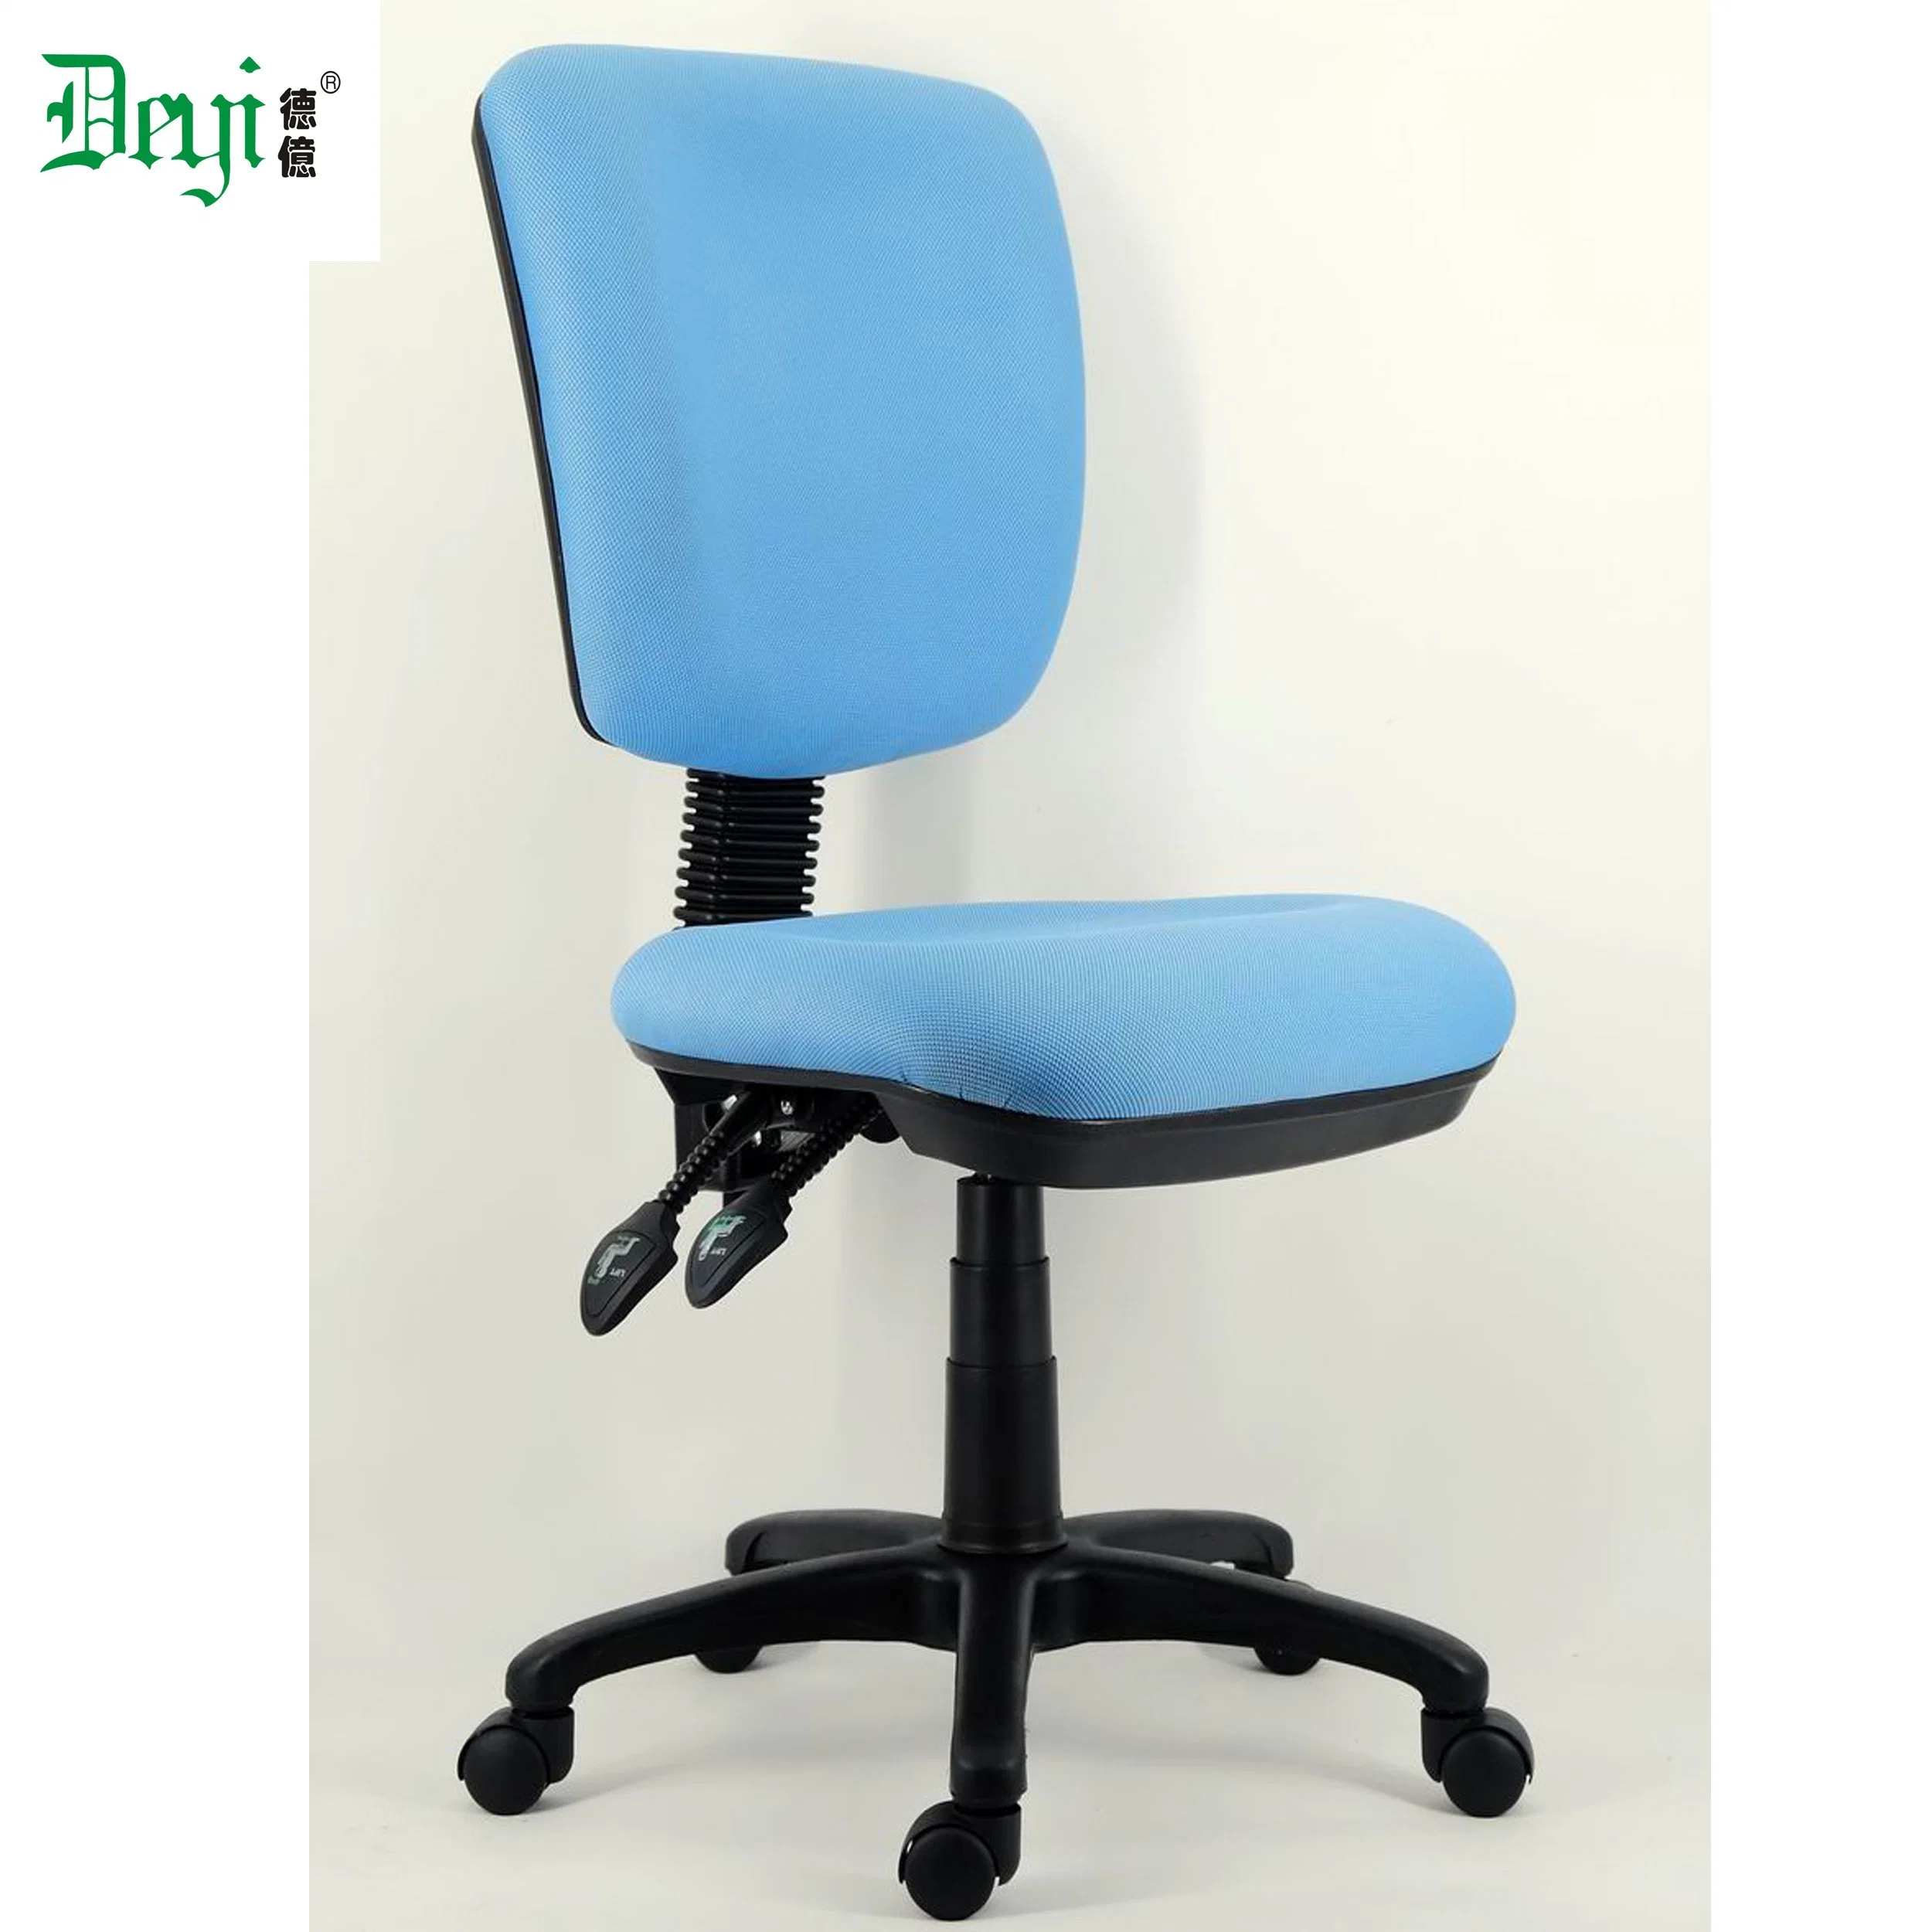 Arm Optional PP Material Cover Home Use Computer Chair